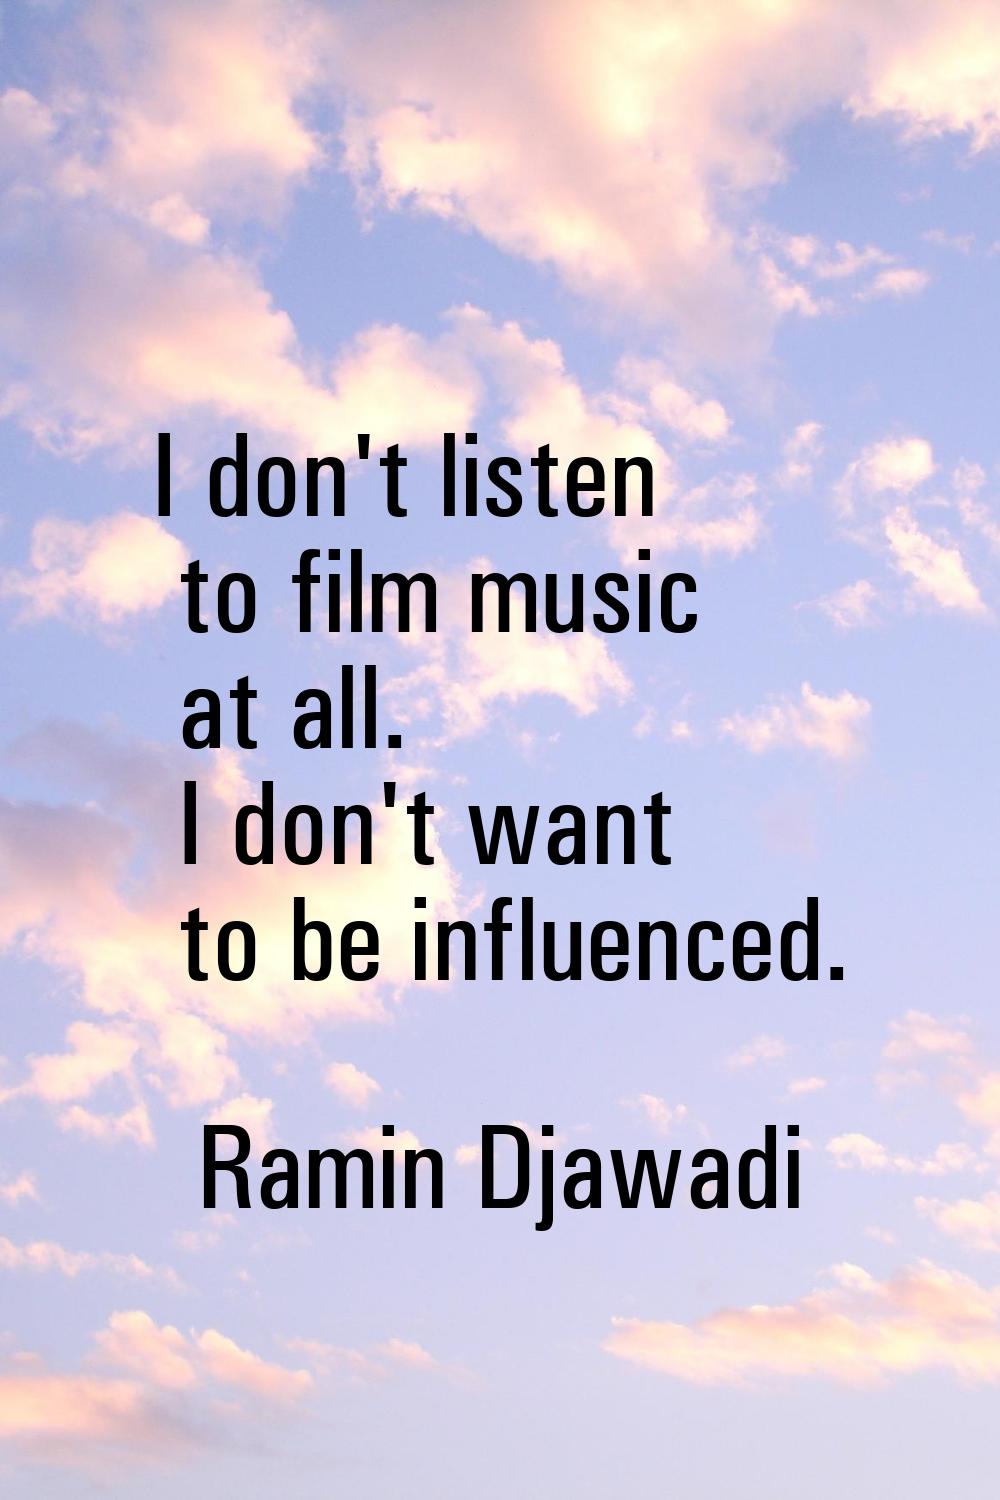 I don't listen to film music at all. I don't want to be influenced.